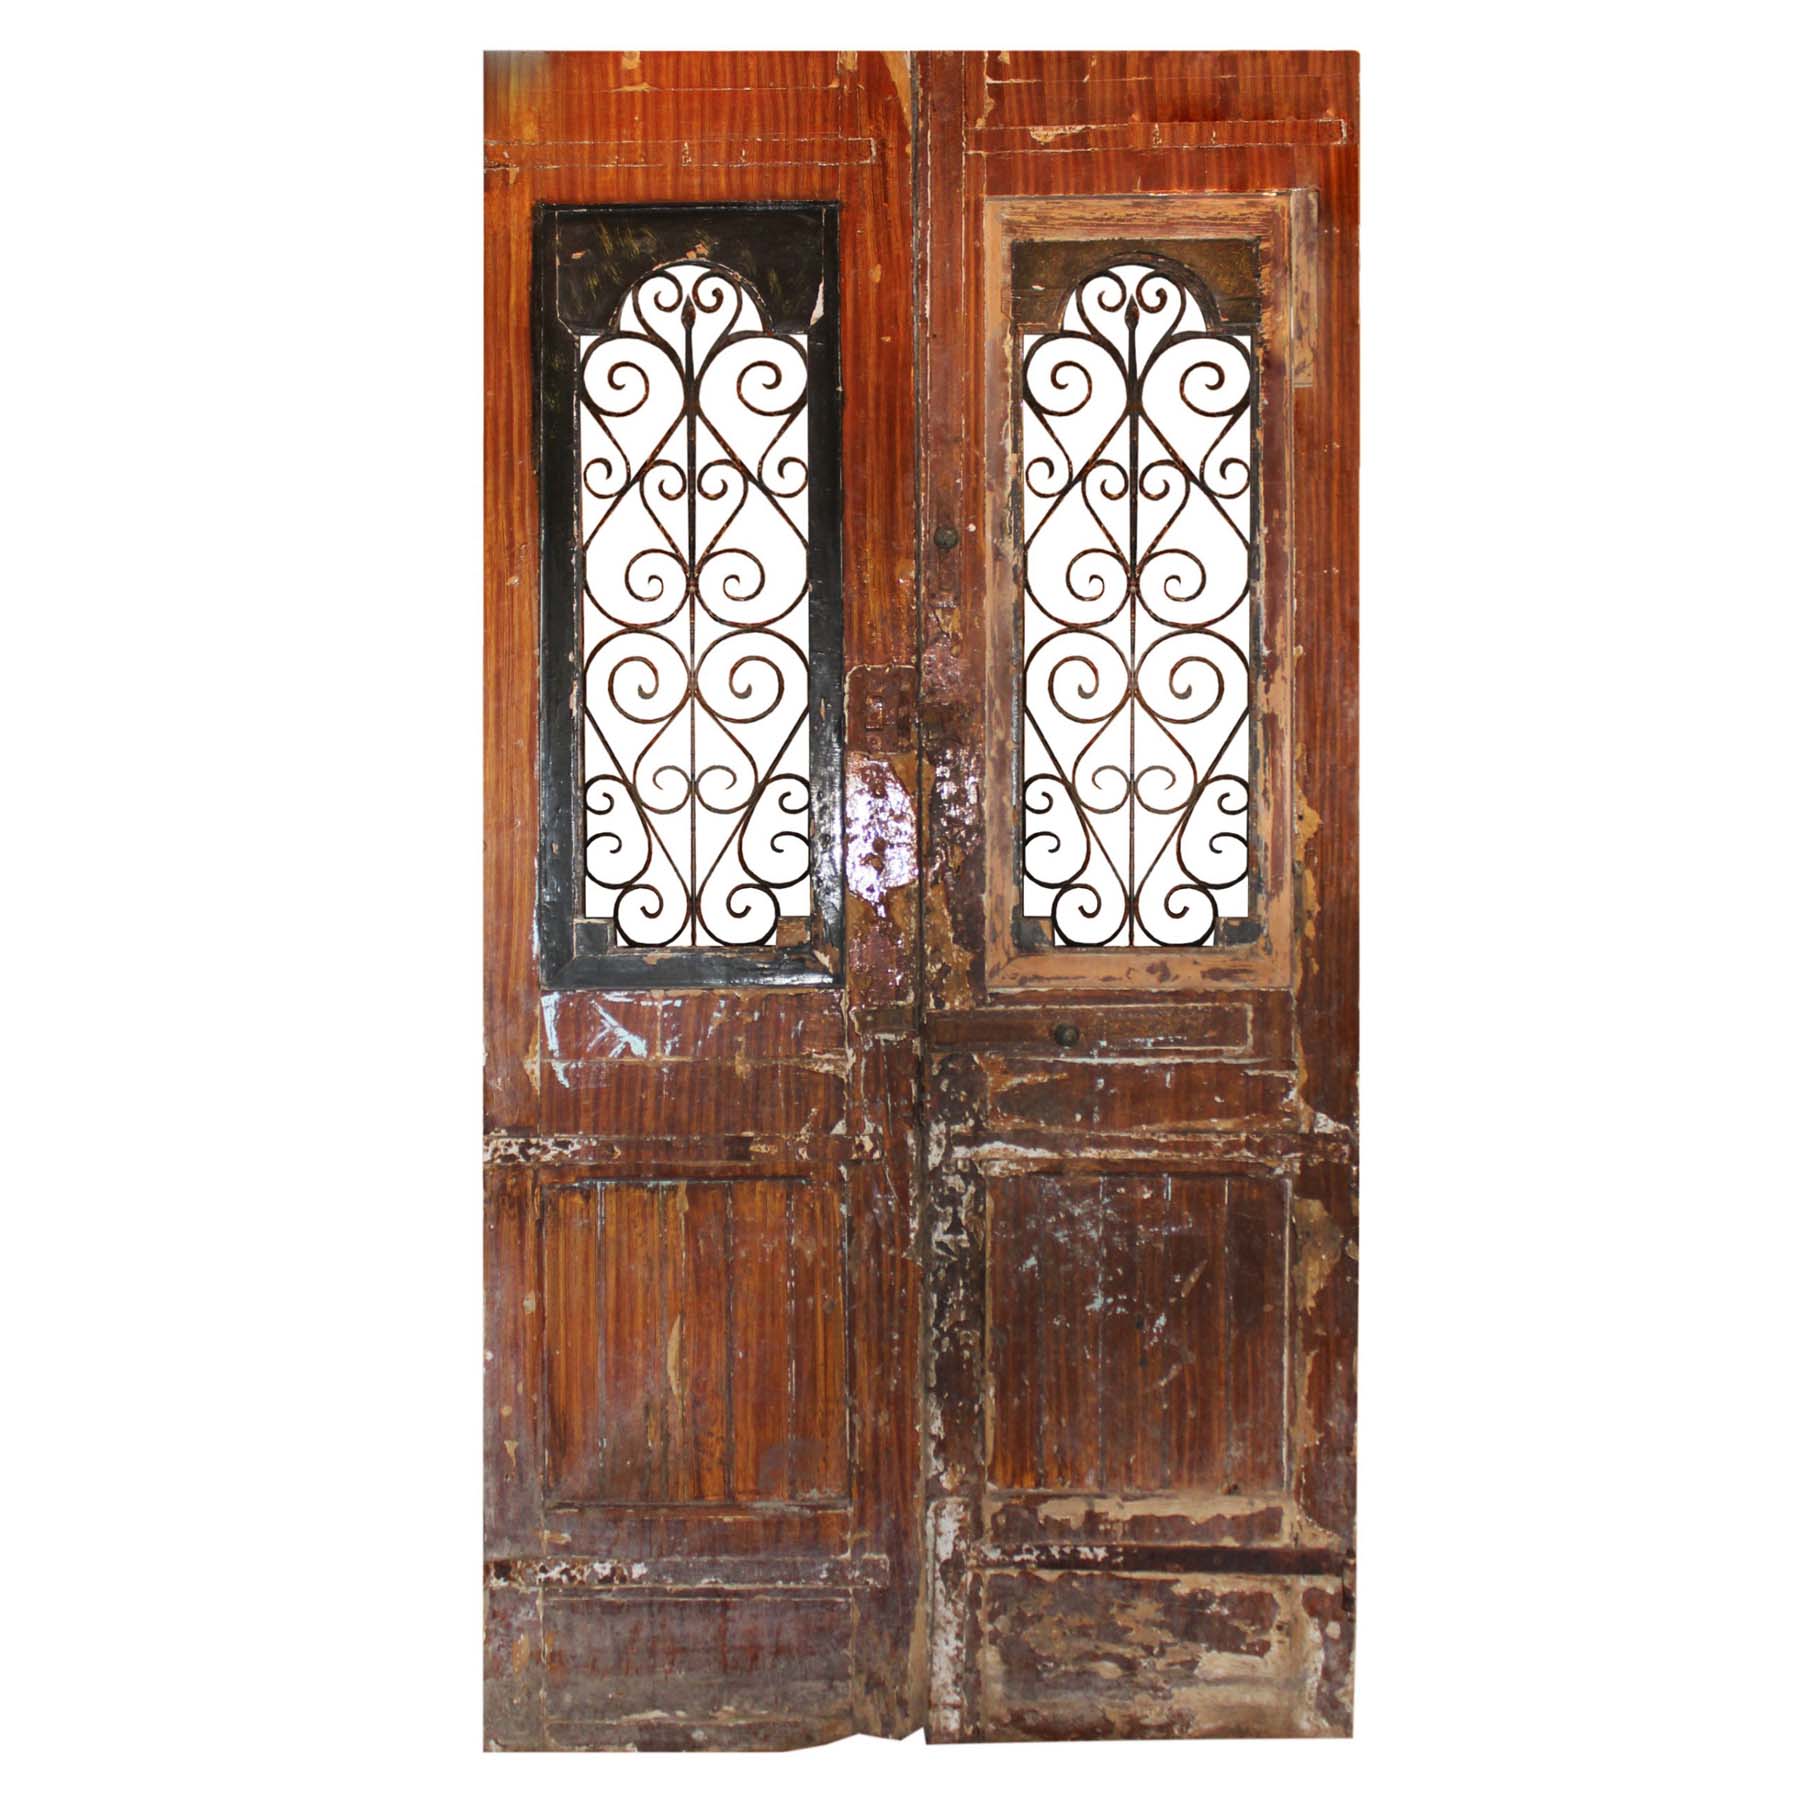 SOLD Substantial Pair of Antique 55” French Colonial Doors with Iron Inserts-69289